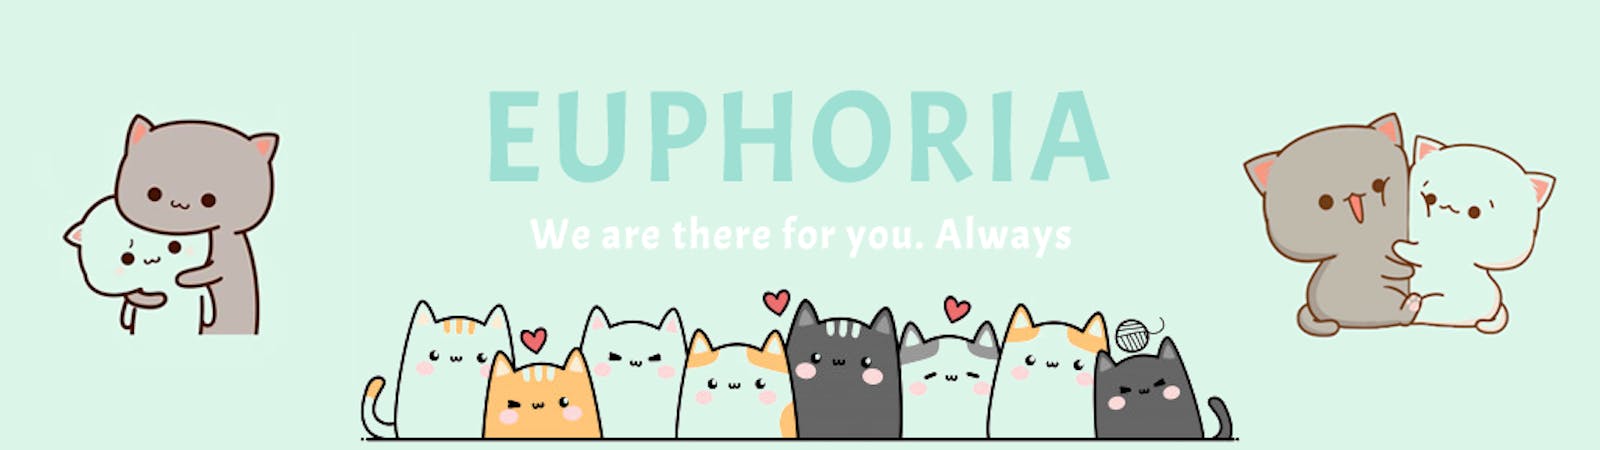 EUPHORIA
We are there for you. Always.